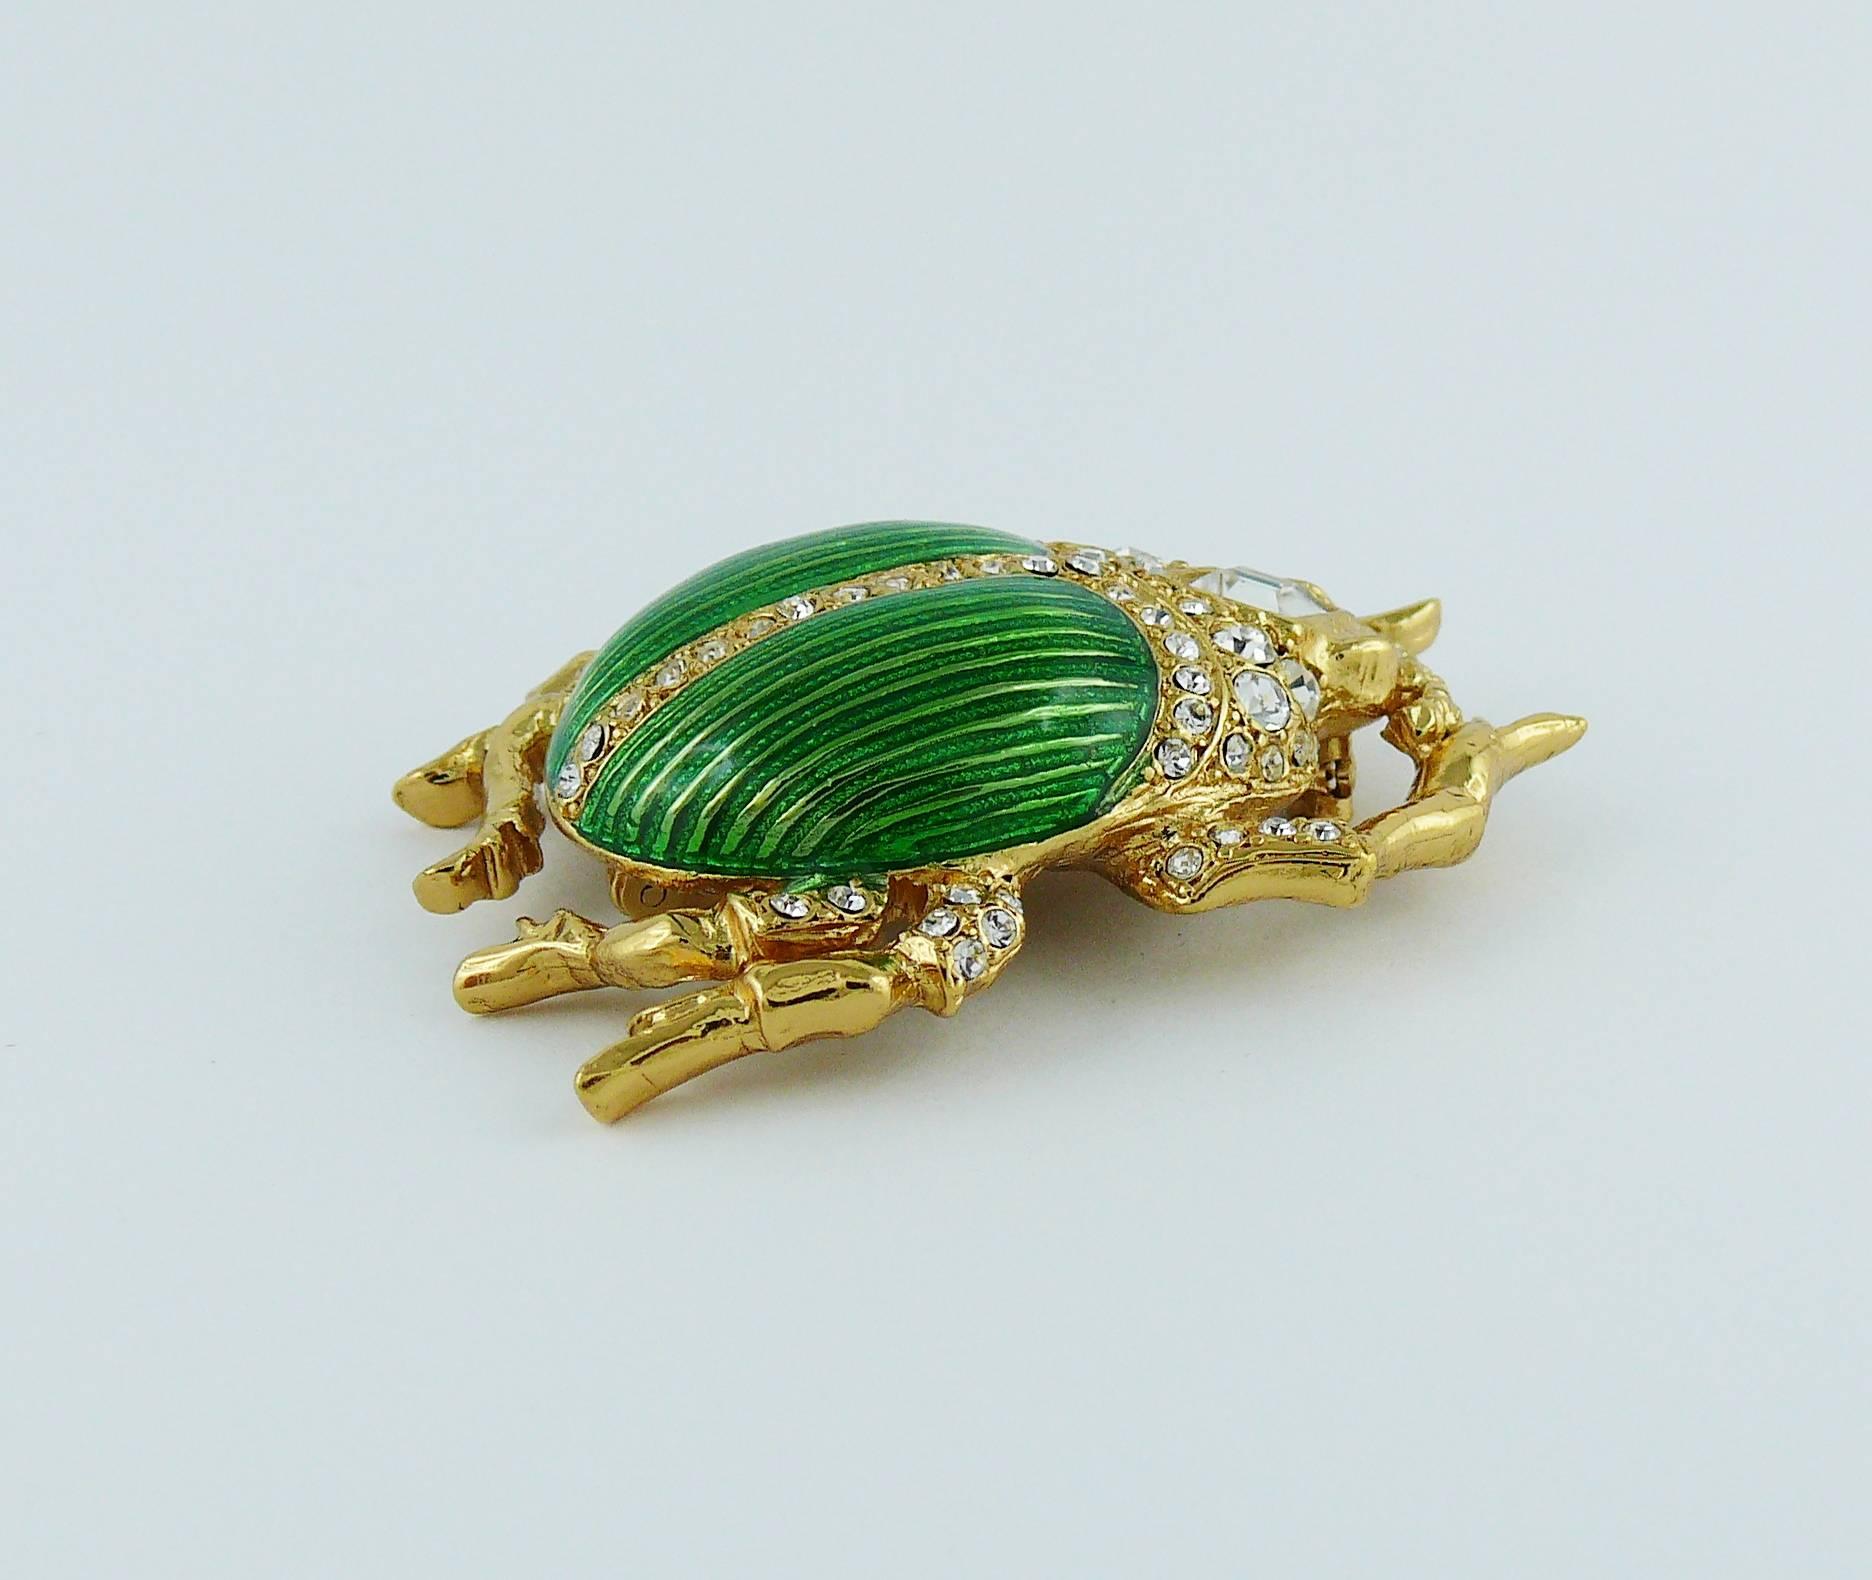 CHRISTIAN DIOR Boutique rare vintage jewelled scarab brooch.

Enameled gold tone metal, embellished with white rhinestones.

Marked CHRISTIAN DIOR Boutique.

Indicative measurements :  length approx. 4.2 cm (1.65 inches) / width approx. 3 cm (1.18